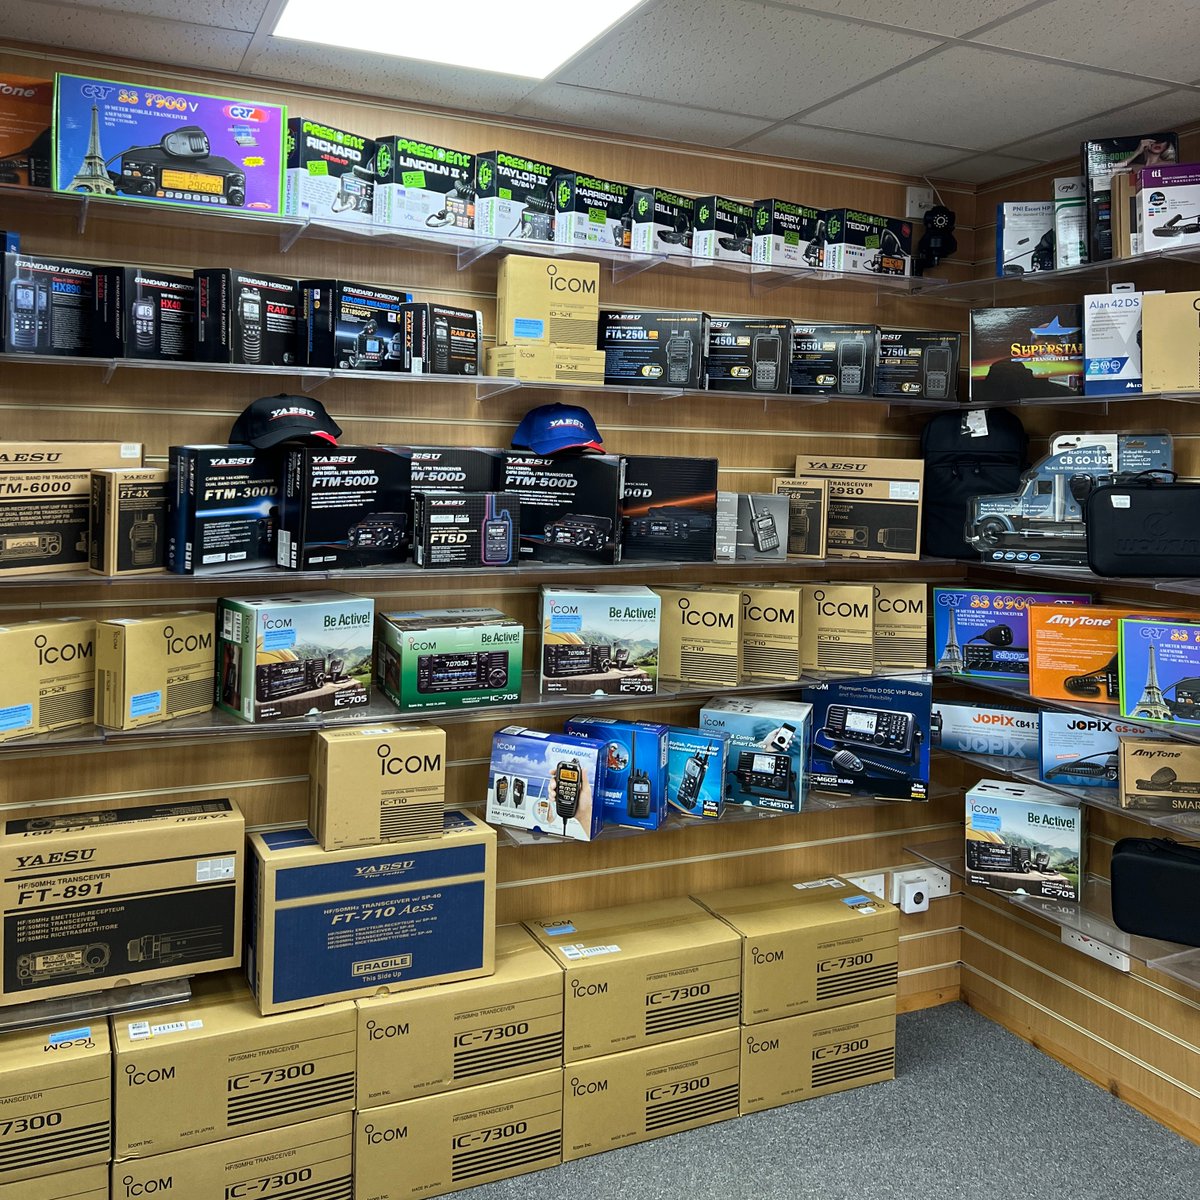 Shelves stocked to perfection 🌟 

Come explore the wonders at Moonraker Base in Milton Keynes 📍

Our shelves are brimming with goodies waiting for you to discover. 

See you soon!

#moonraker #hamradio #amateurradio #amateurradiooperator #hamradioantenna #hamradiocommunity